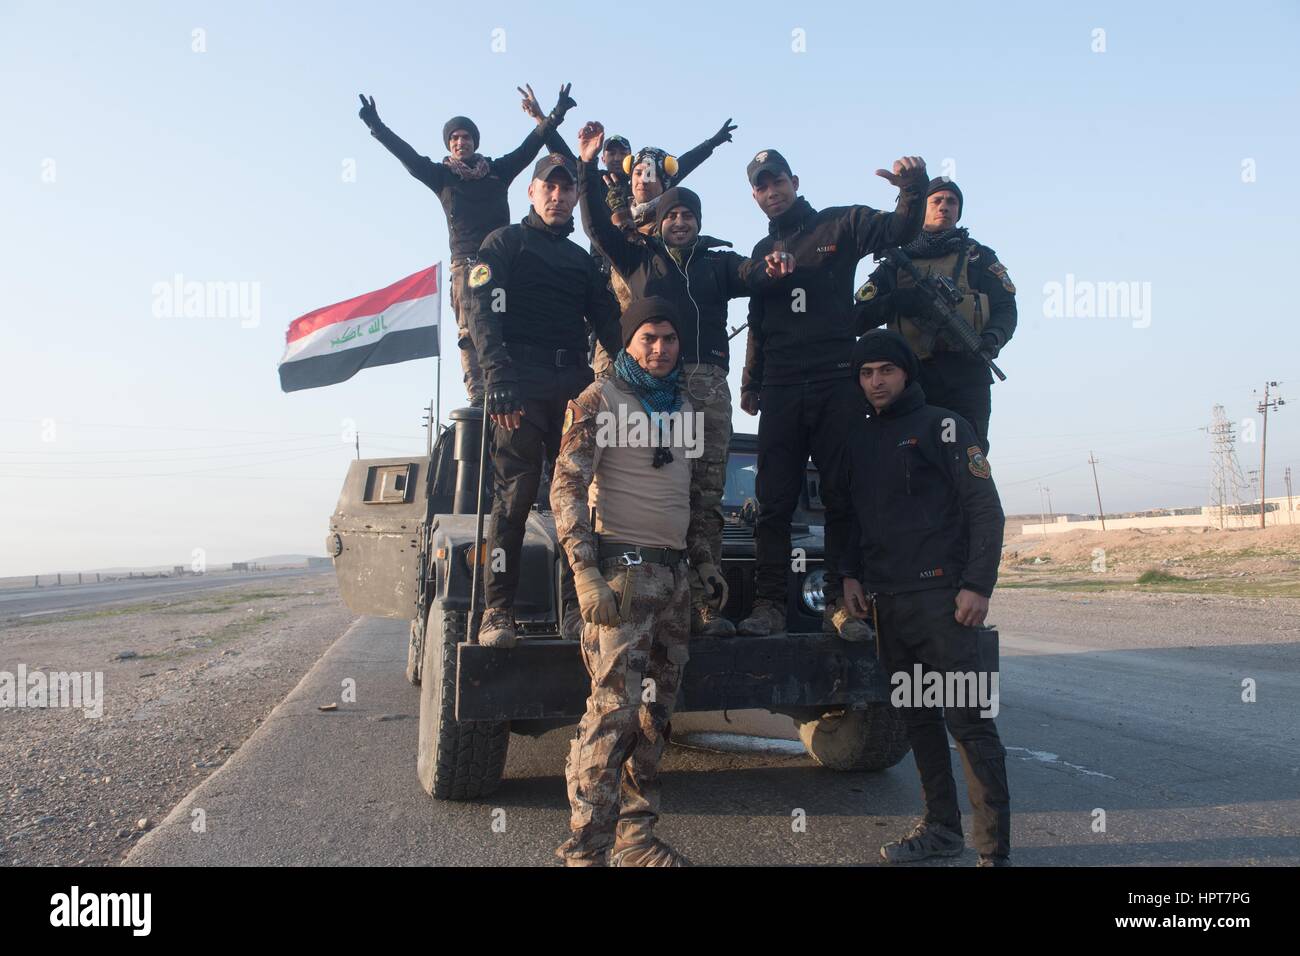 Mosul, Iraq. 23rd Feb, 2017. Iraqi Special Forces soldiers pose for a group photo before boarding their convoy to the frontline as the Iraq government continues to capture territory from ISIS February 23, 2017 in Mosul, Iraq. Iraqi forces moved into western Mosul taking full control of the international airport on the southwestern edge of the city. Credit: Planetpix/Alamy Live News Stock Photo